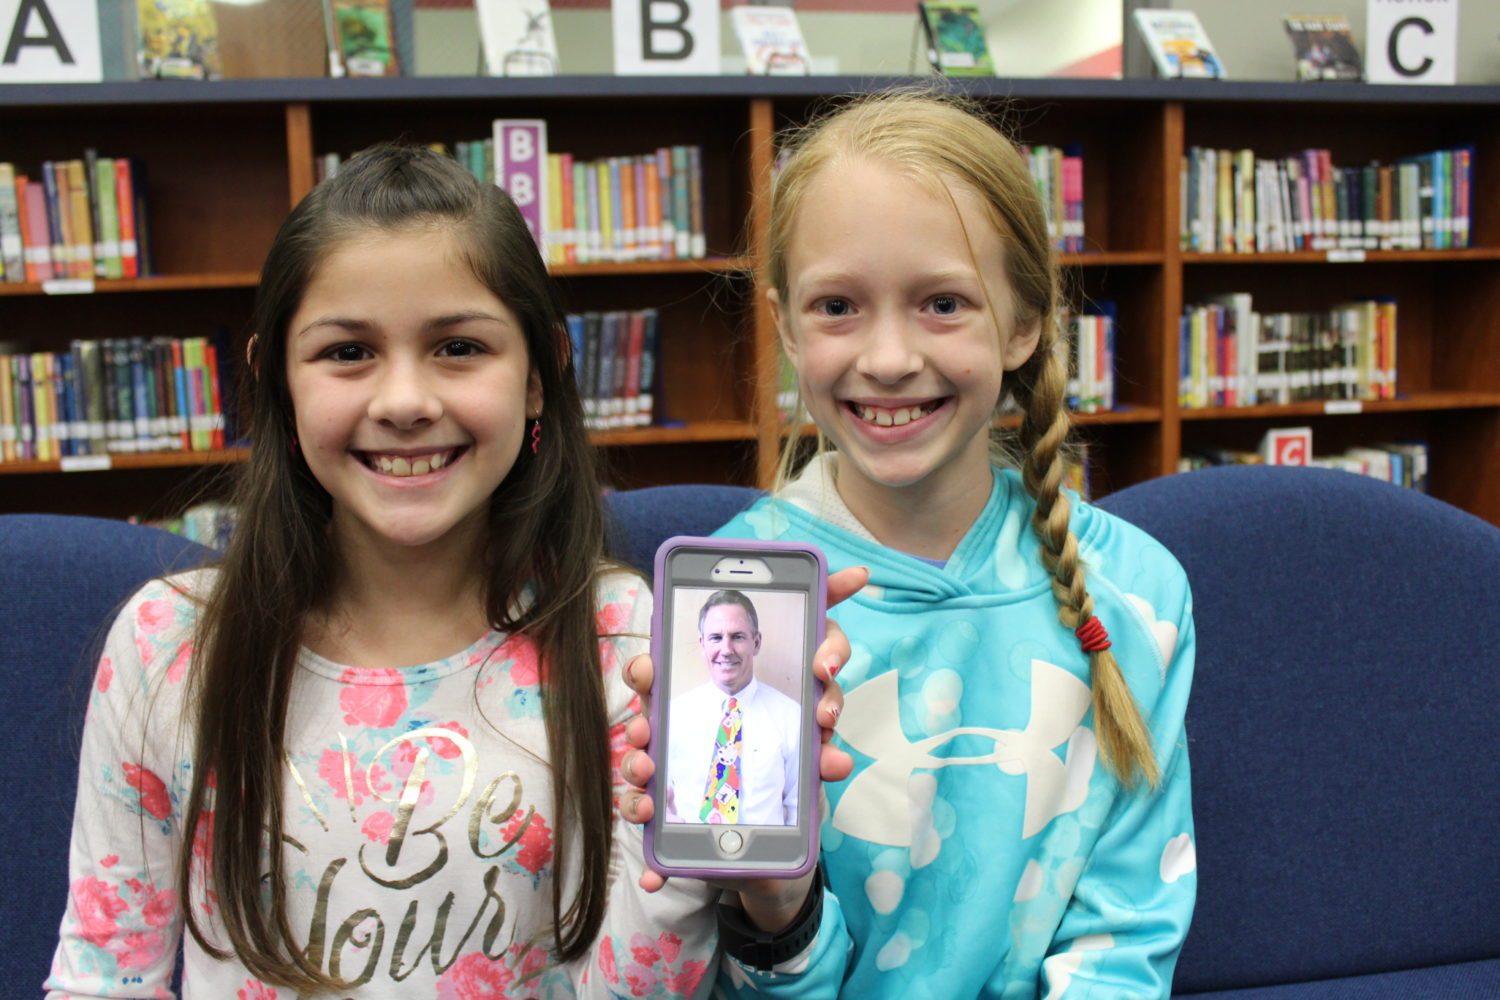 Wilkerson Intermediate artists from Ms. Graham's art class pose with a picture of Dr. Stockton wearing the tie they designed and created for Big Art Day in CISD.